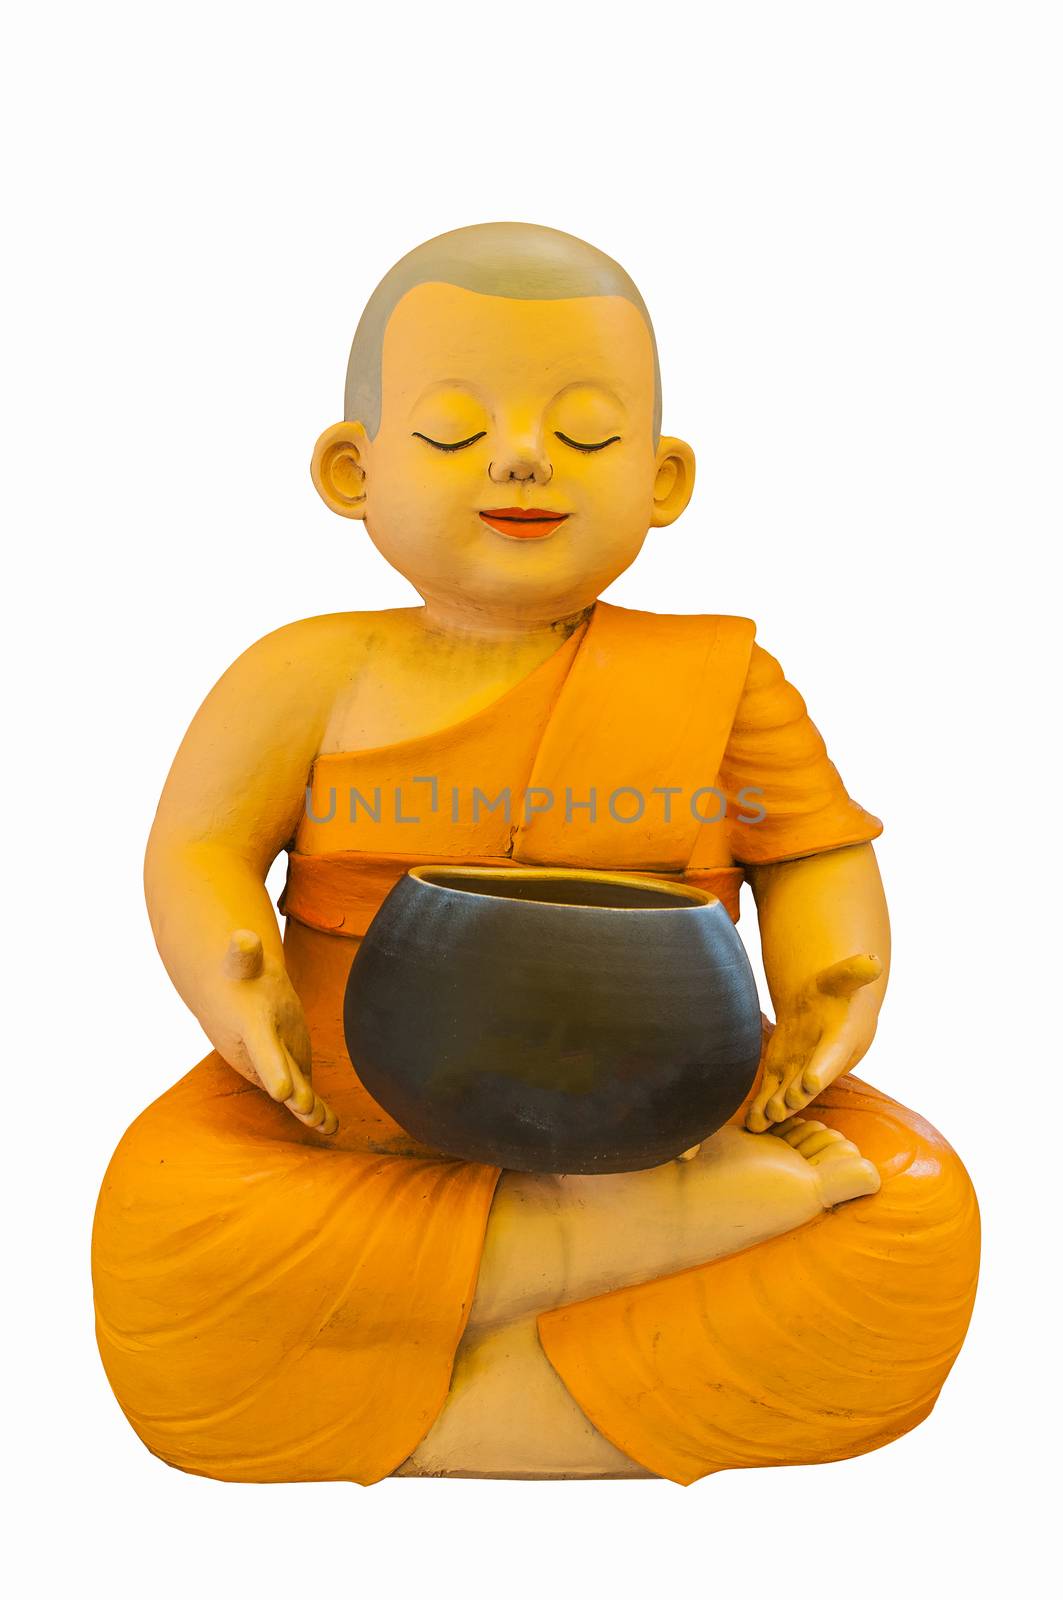 Earthenware of child monk on white background